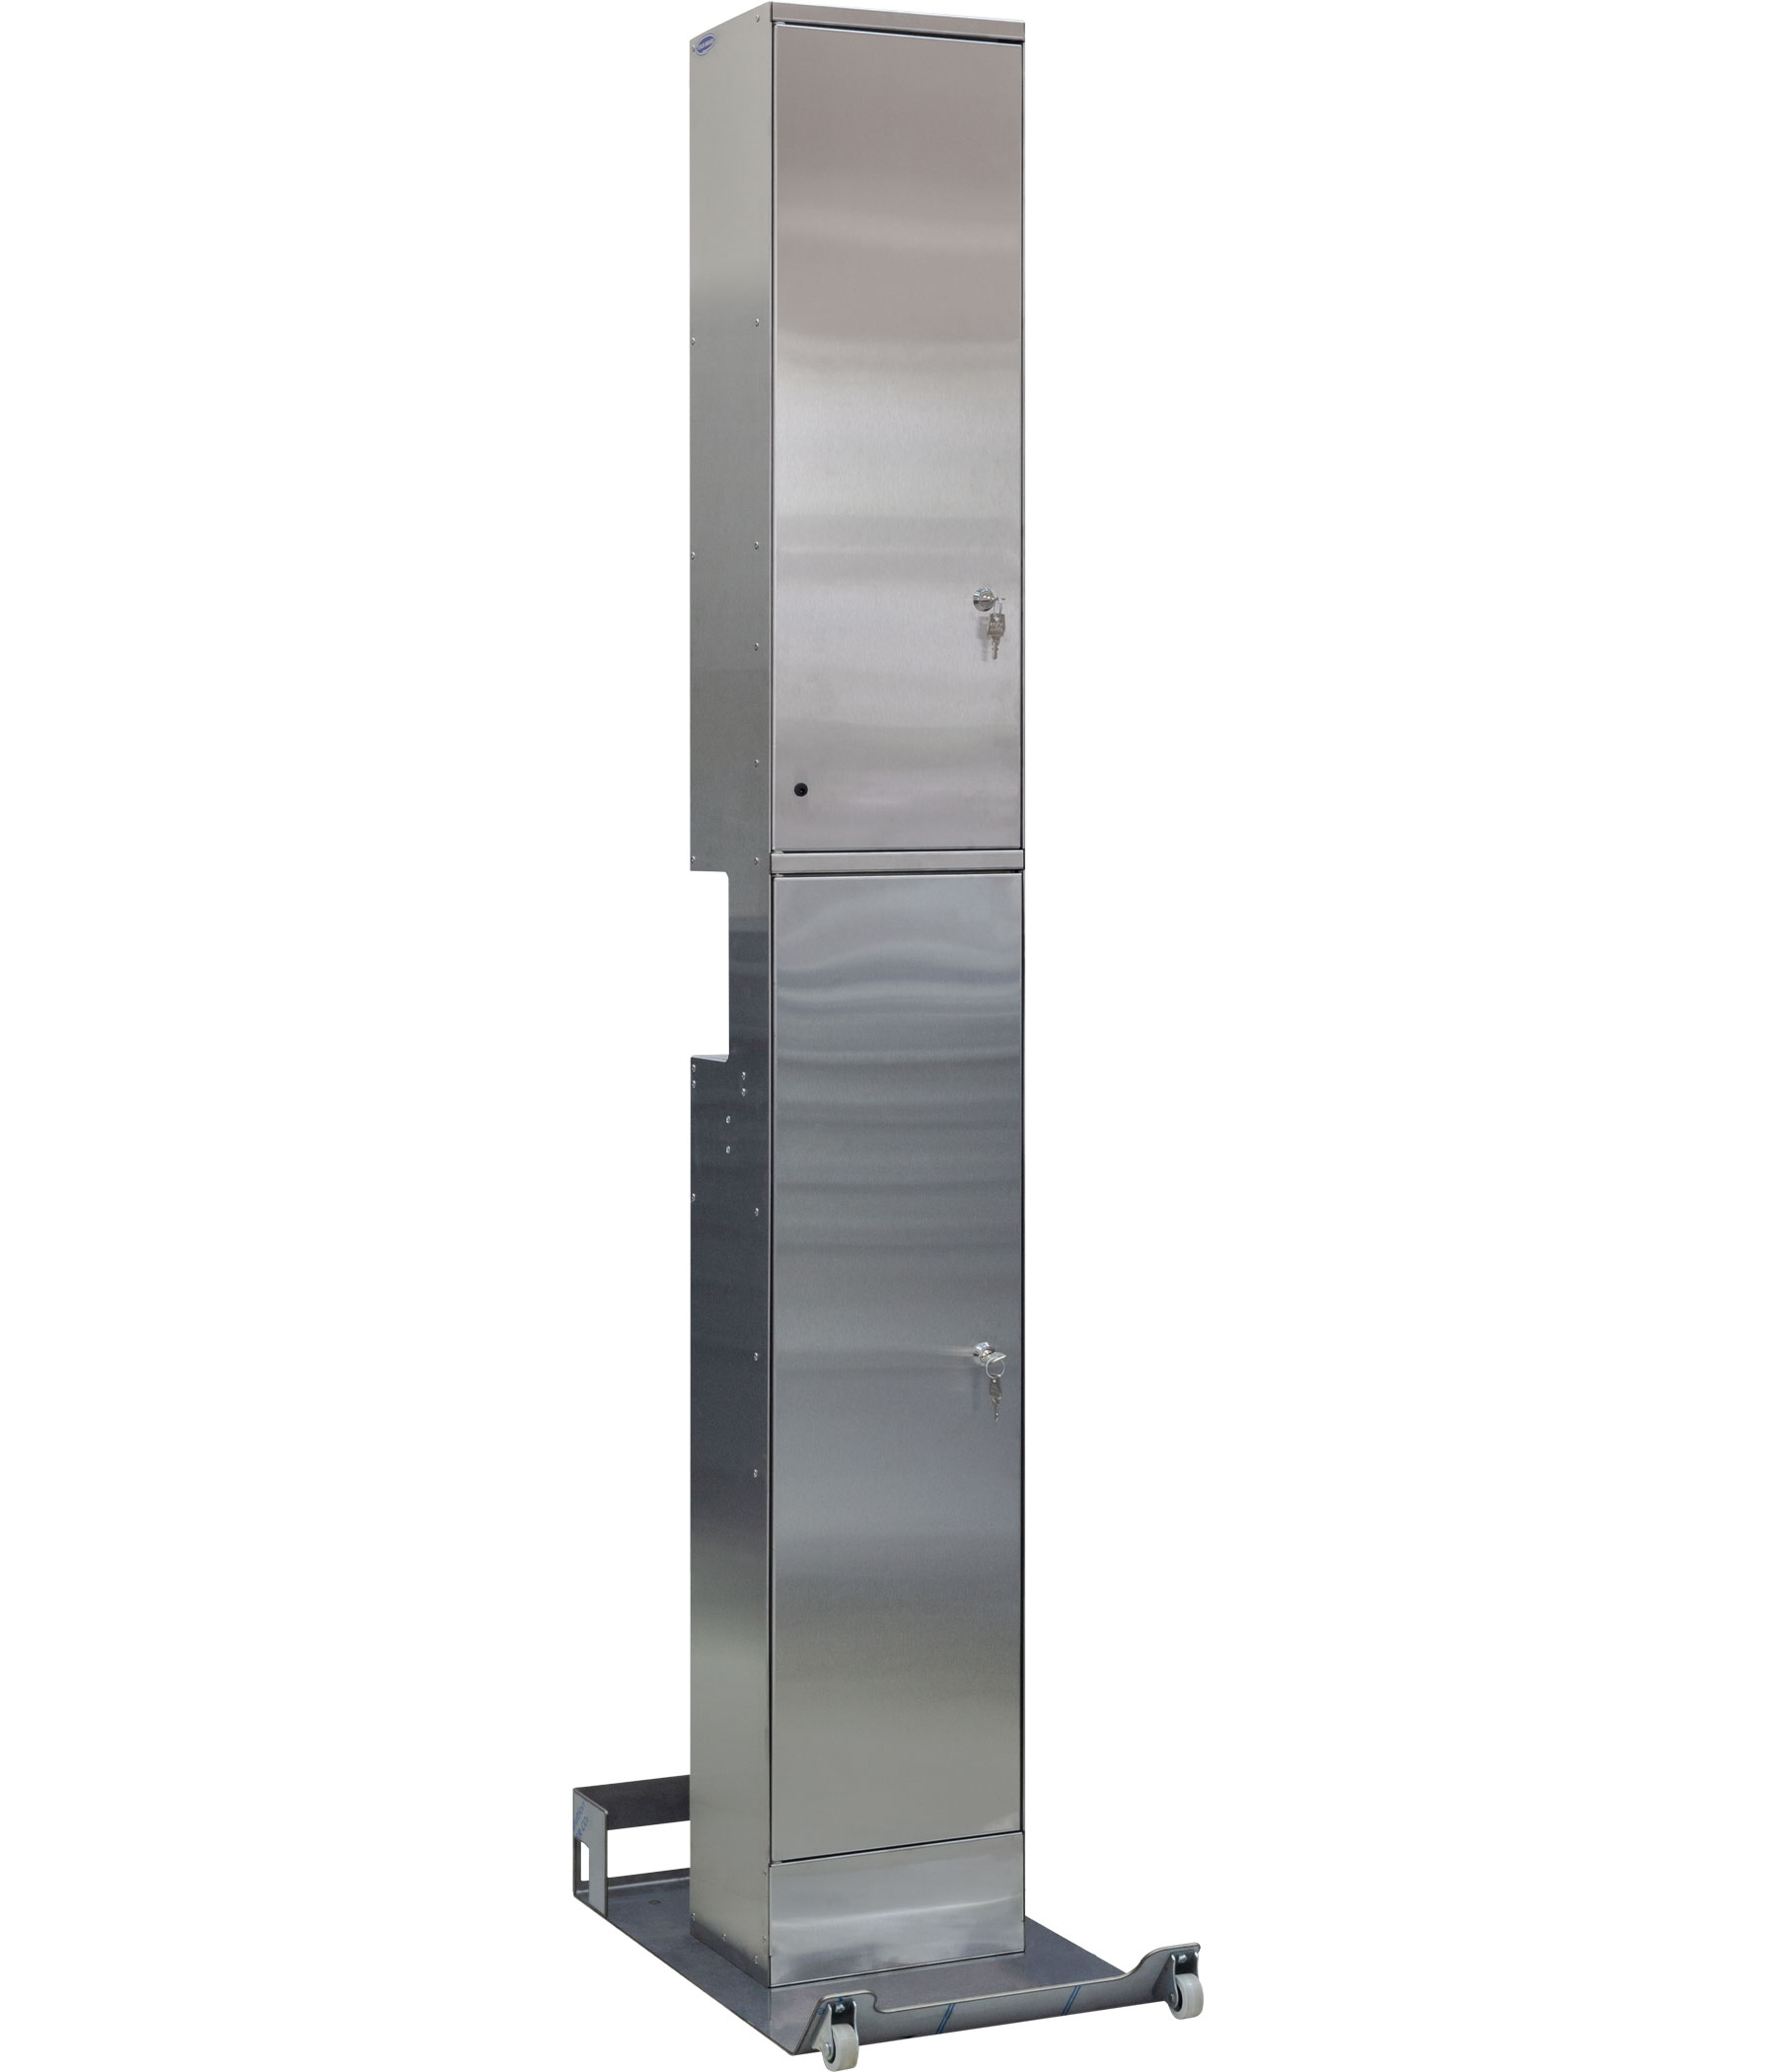 The back side of the stainless hand disinfection rack GSN-19